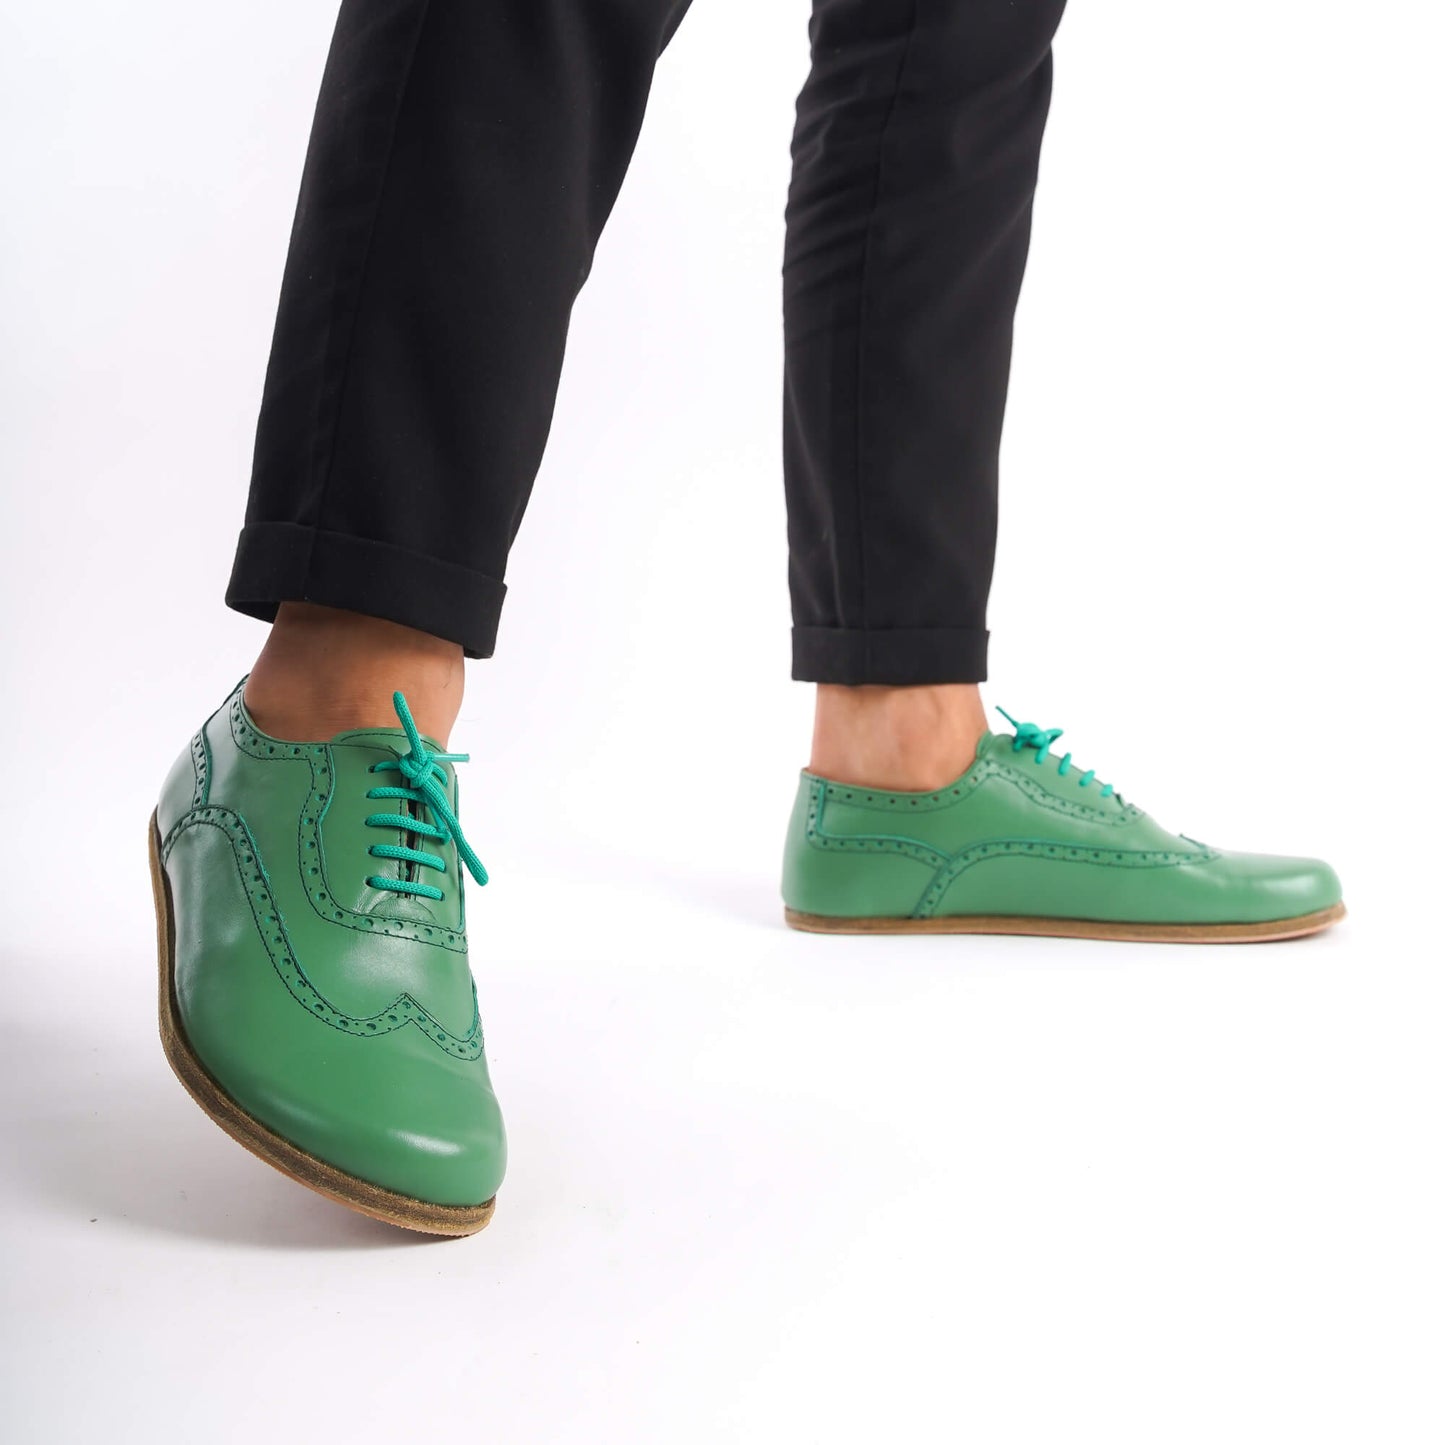 Man walking in green Doris Leather Barefoot Oxfords with brogue design, highlighting foot flexibility.